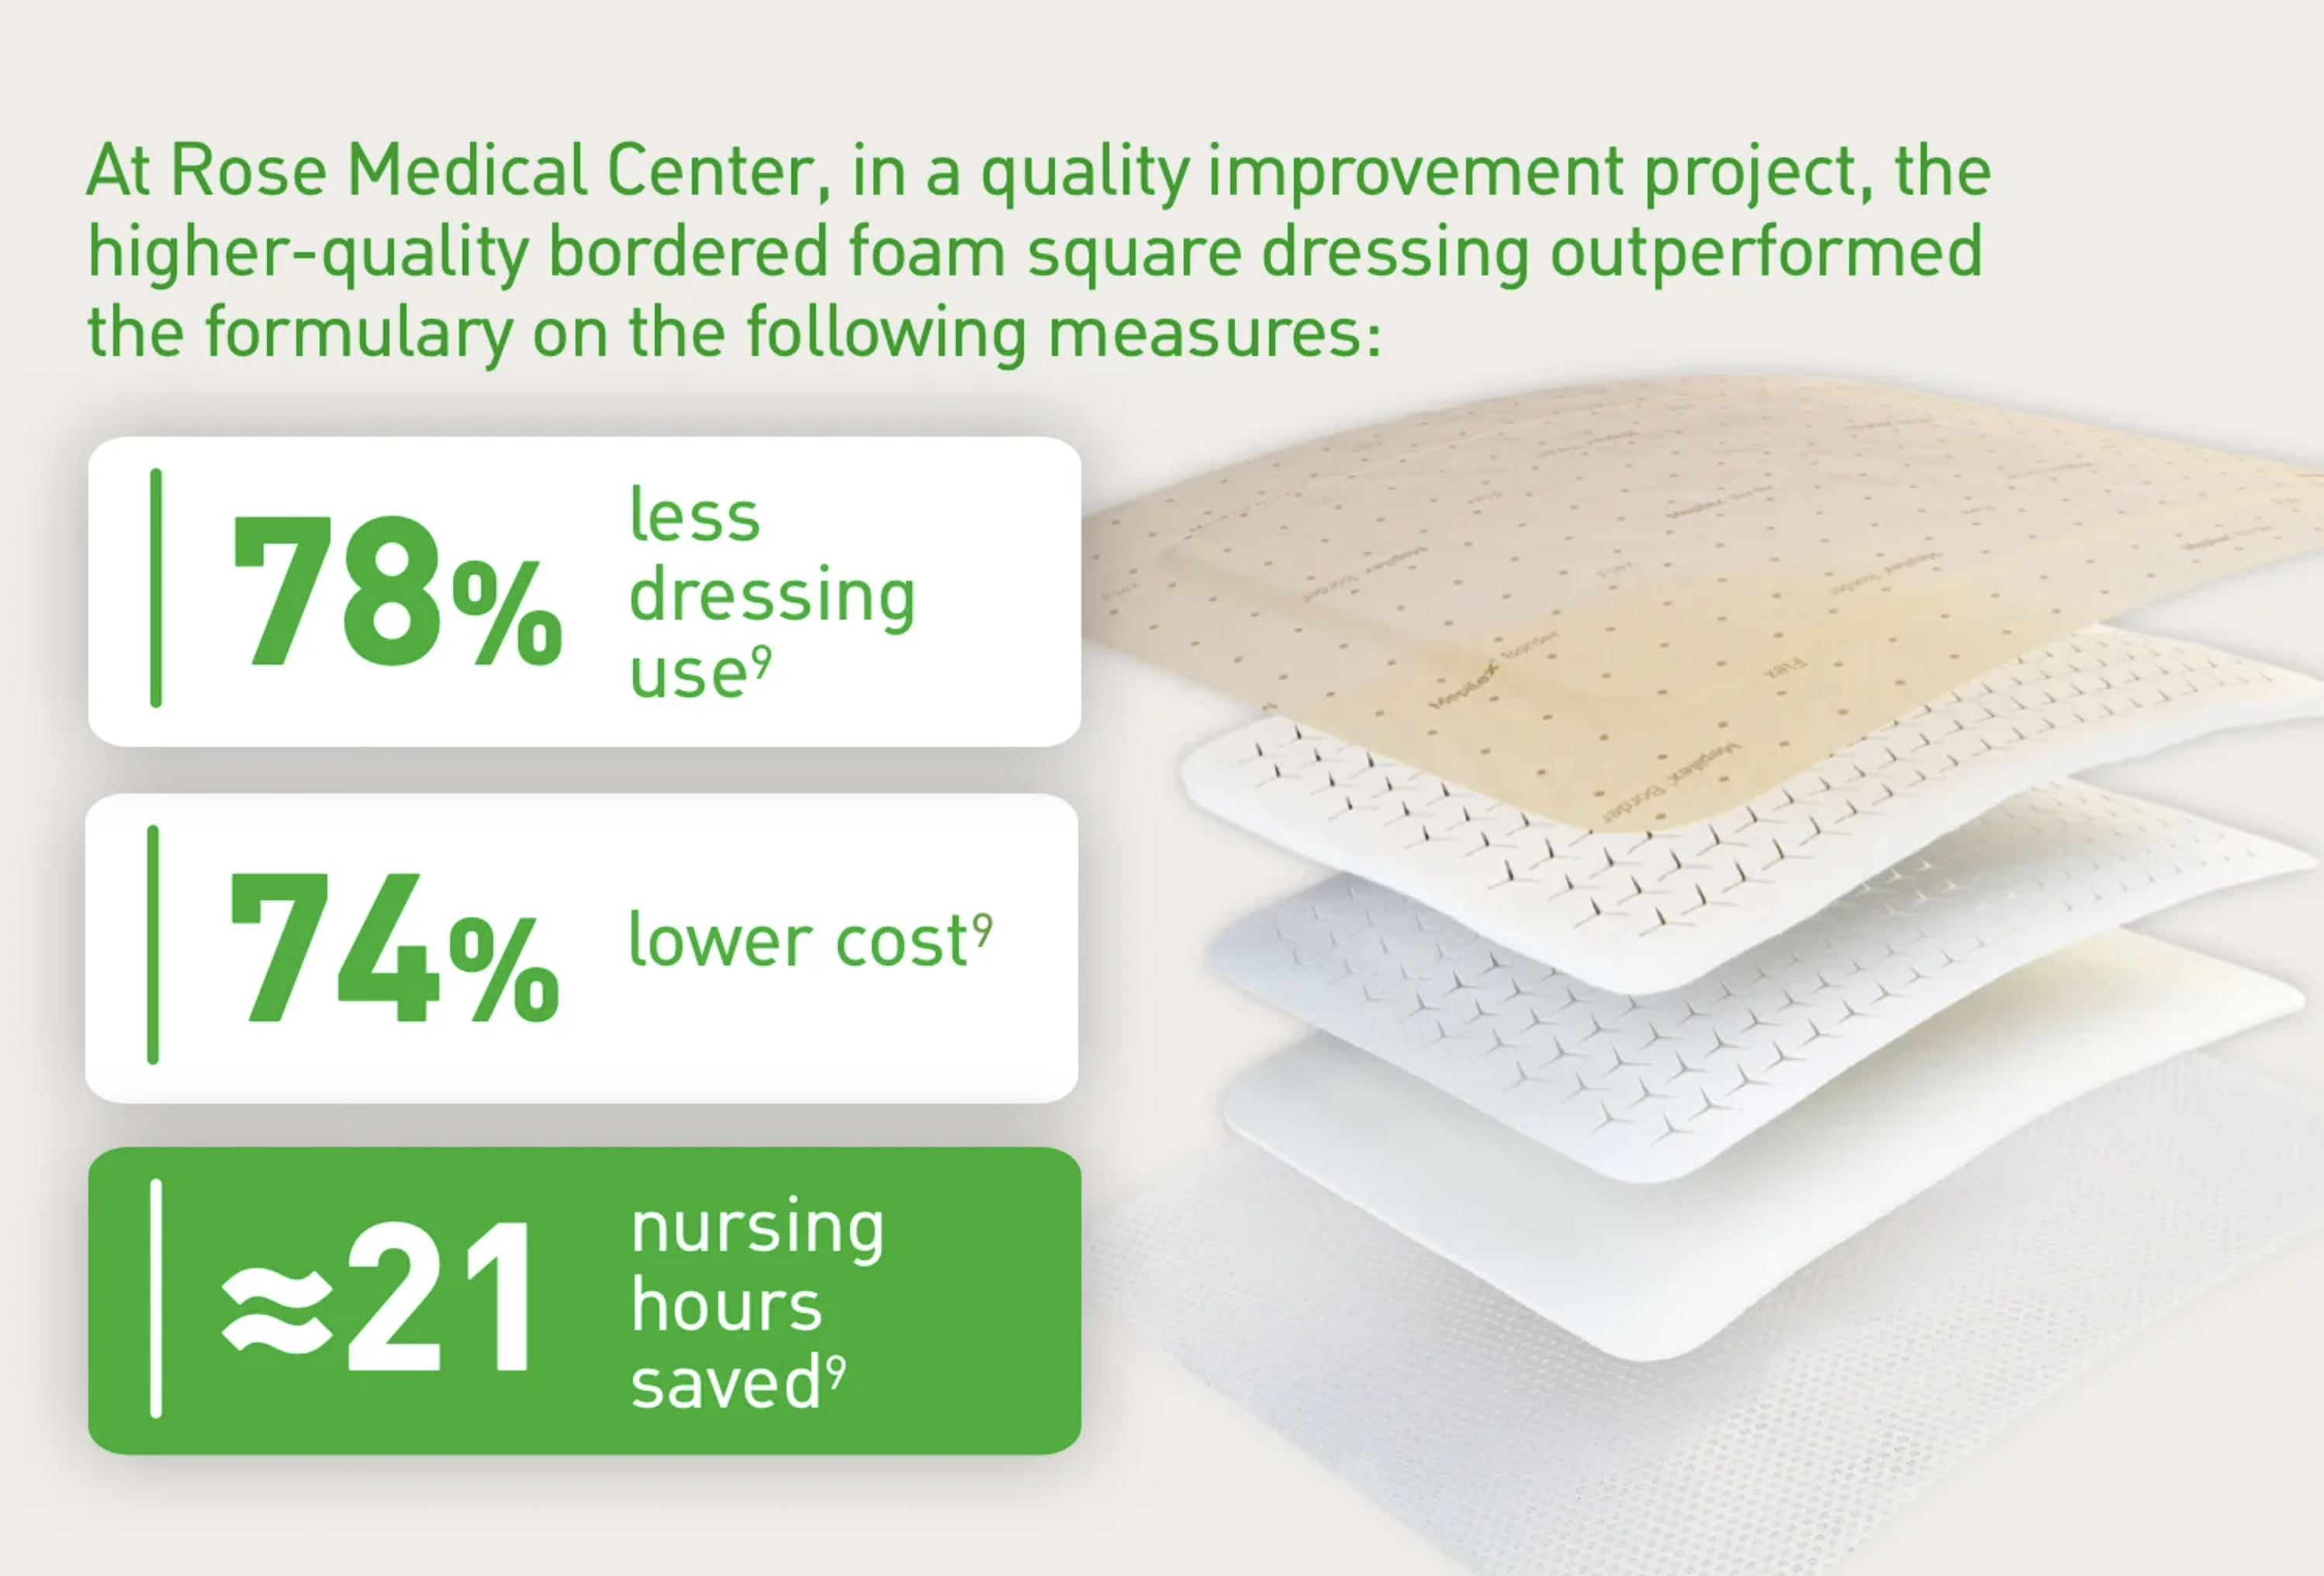 higher-quality-boardered-foam-square-dressing-outperformed-the-formulary.png